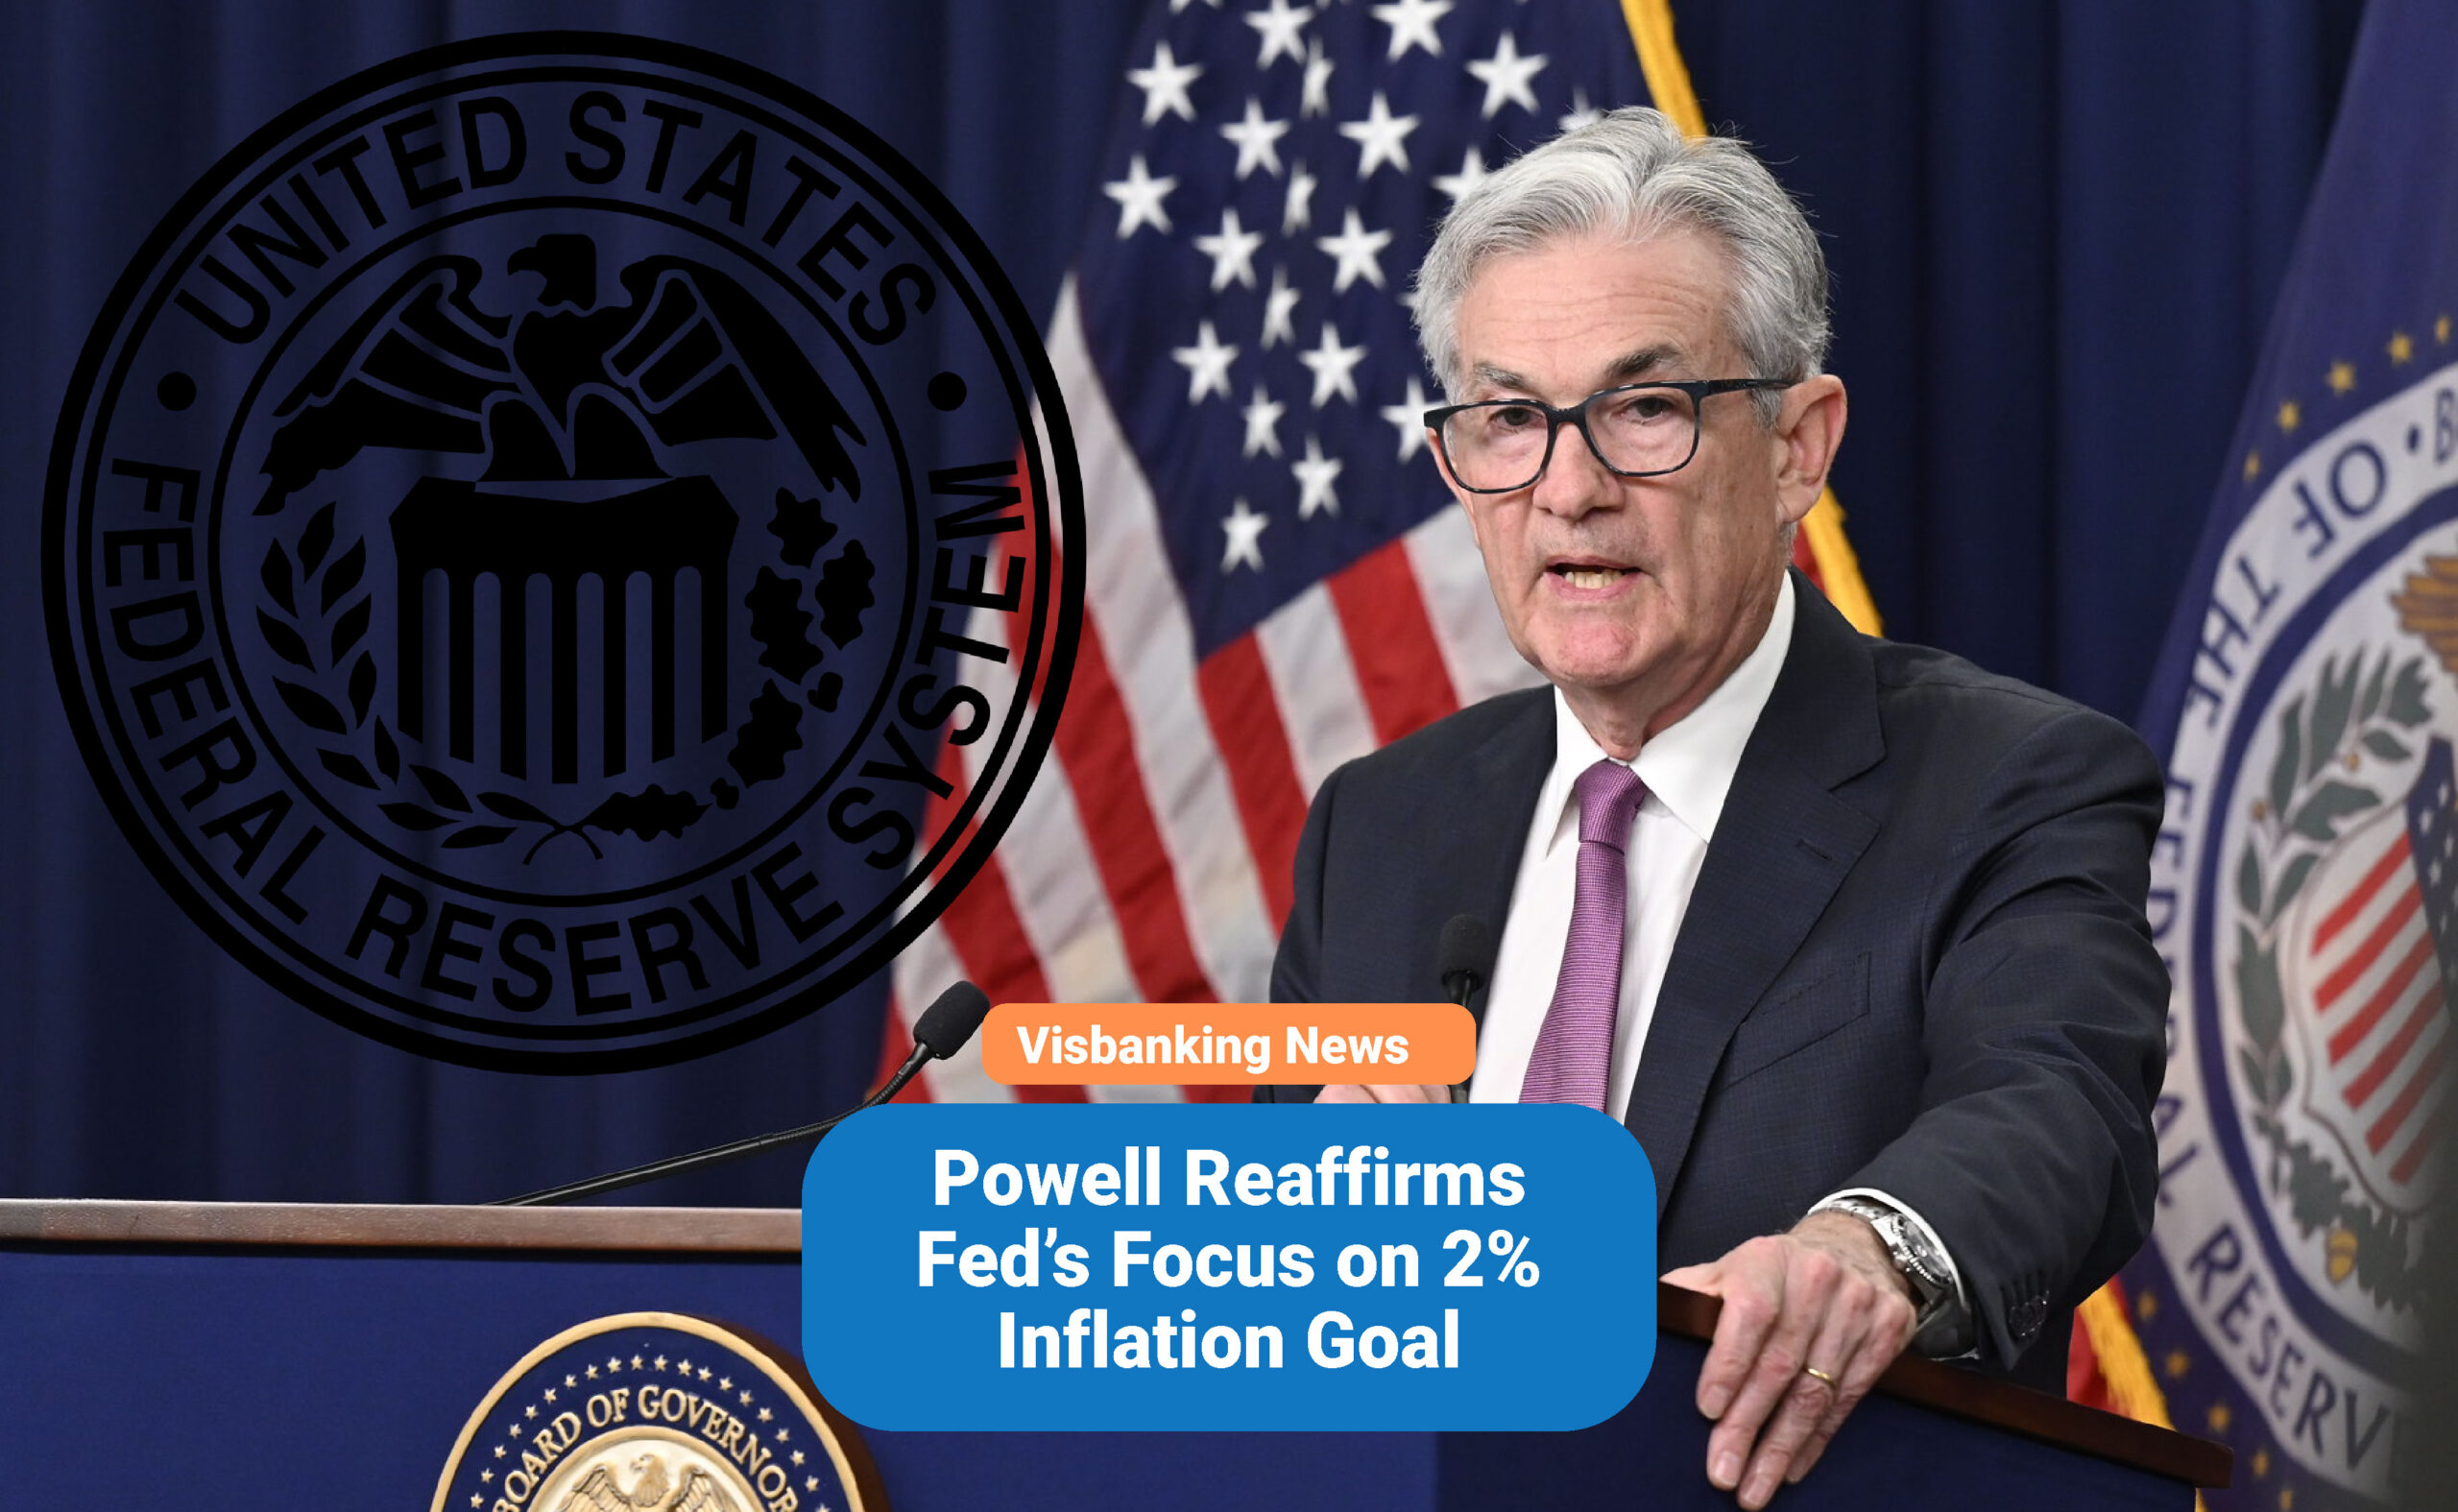 Powell Reaffirms Fed’s Focus on 2% Inflation Goal